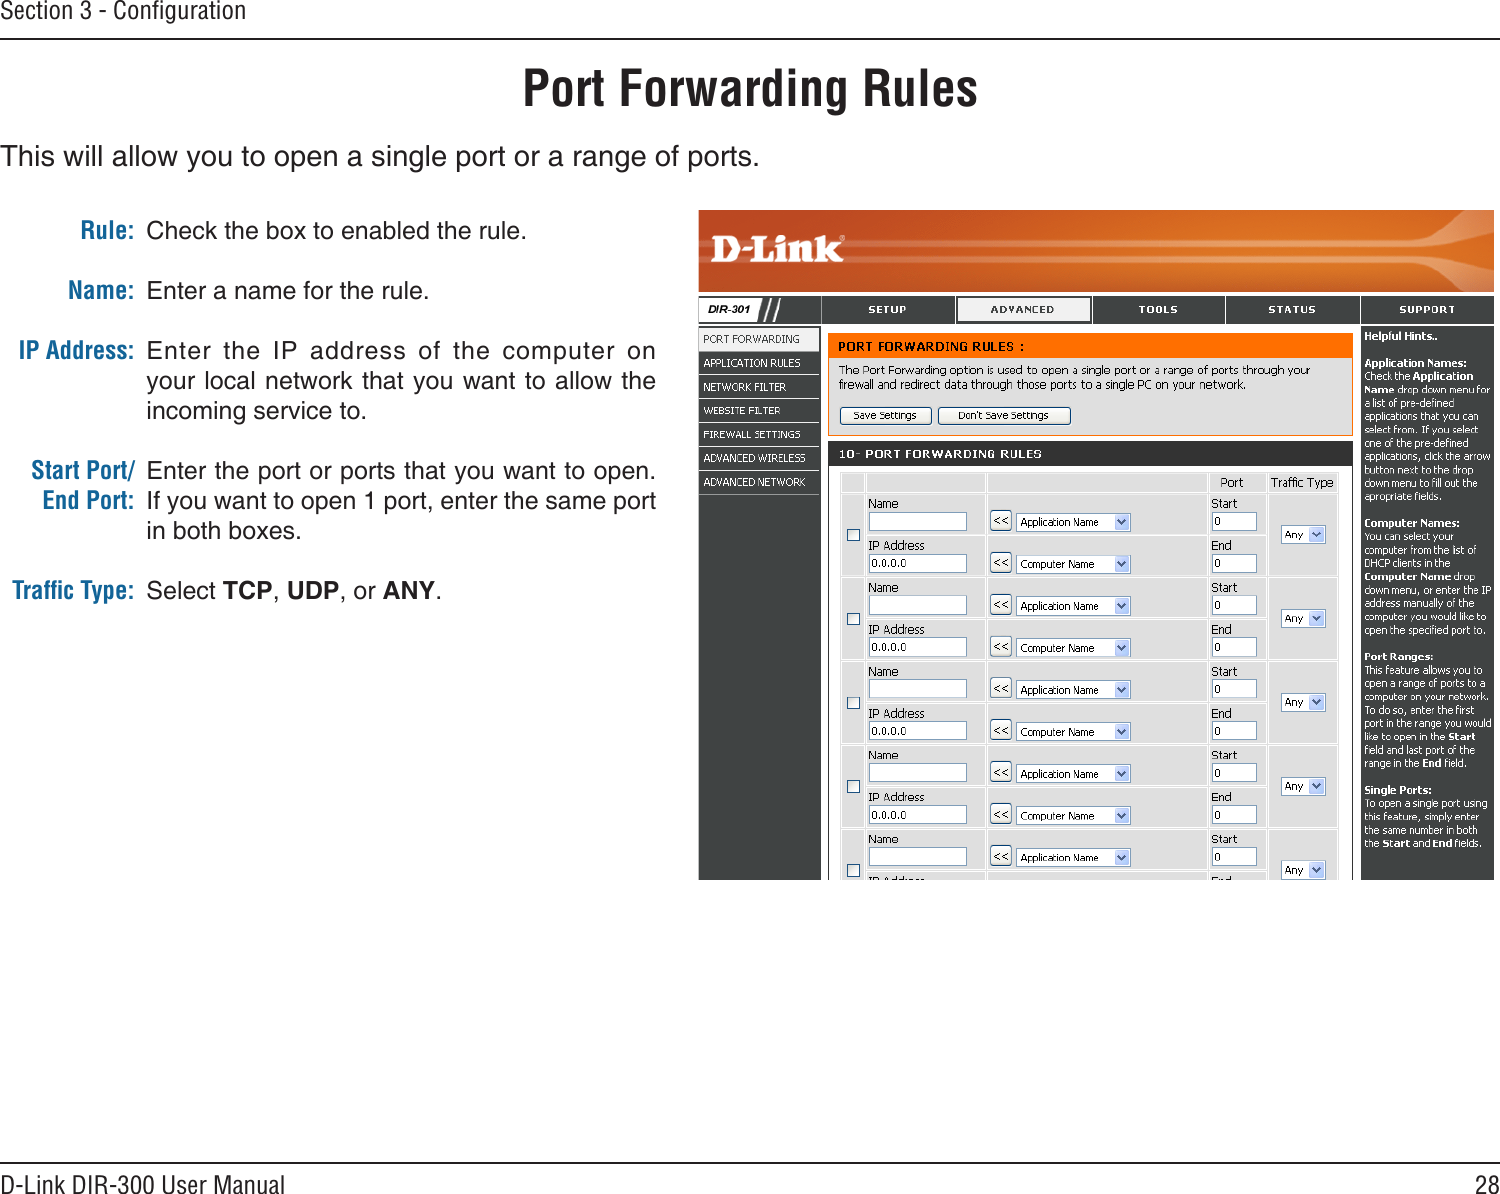 28D-Link DIR-300 User ManualSection 3 - ConﬁgurationPort Forwarding RulesThis will allow you to open a single port or a range of ports.Check the box to enabled the rule. Enter a name for the rule.Enter  the  IP  address  of  the  computer  on your local network that you want to allow the incoming service to.Enter the port or ports that you want to open. If you want to open 1 port, enter the same port in both boxes.Select TCP, UDP, or ANY.Rule:Name:IP Address:Start Port/End Port:Trafﬁc Type: